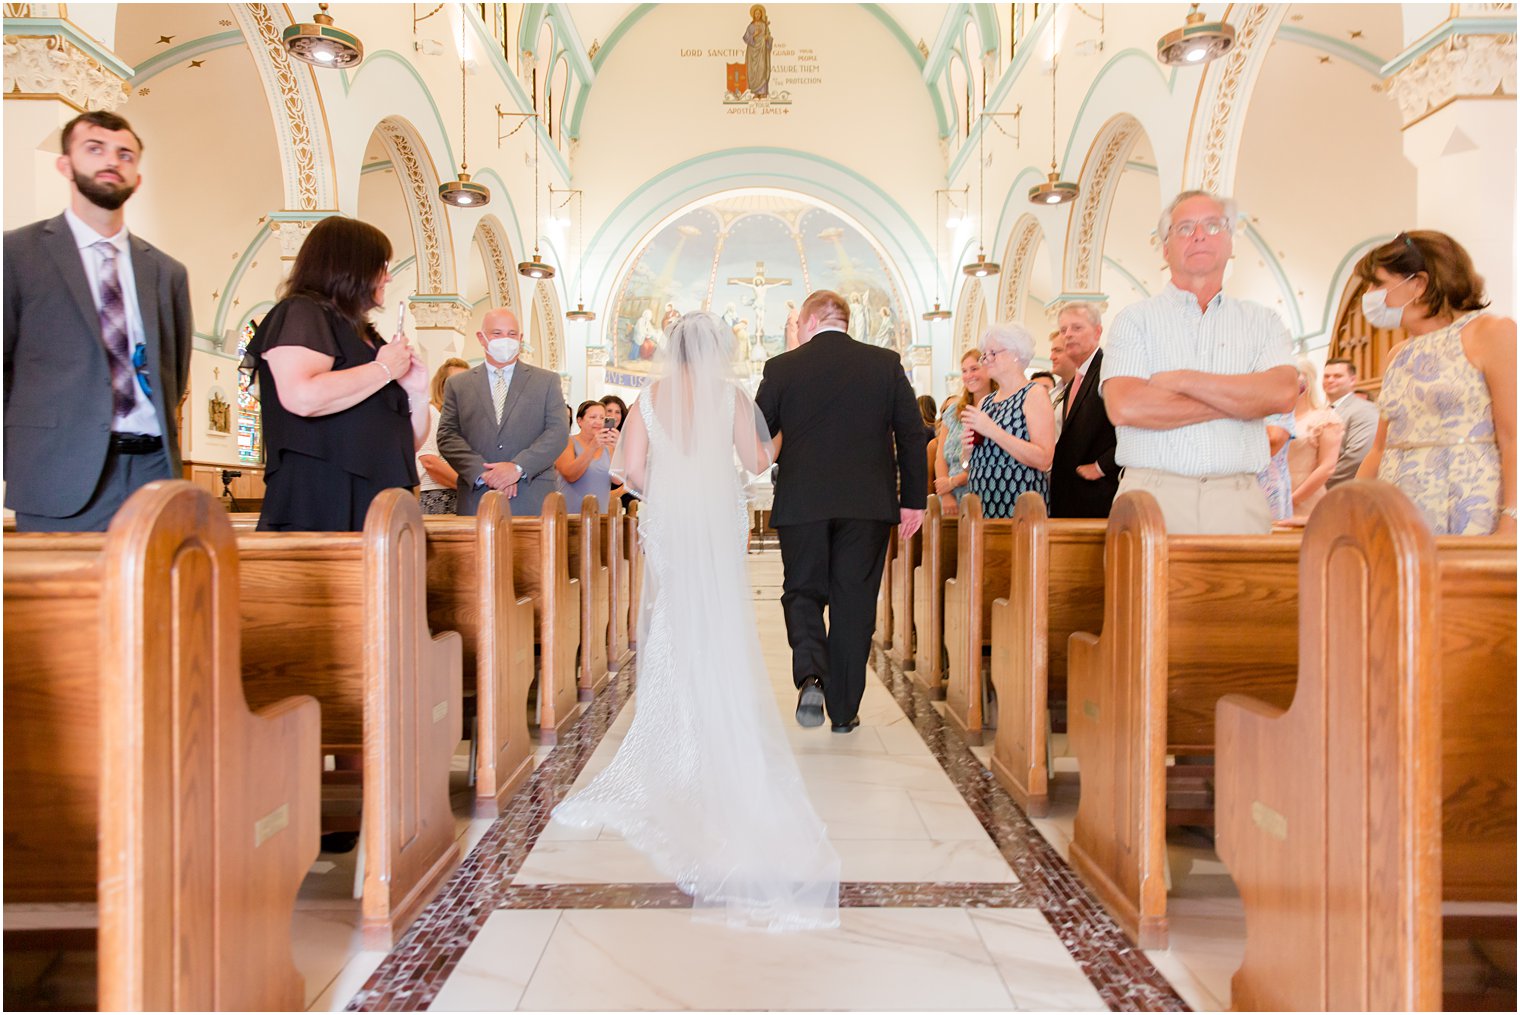 bride walks down aisle for traditional wedding ceremony at St. James church